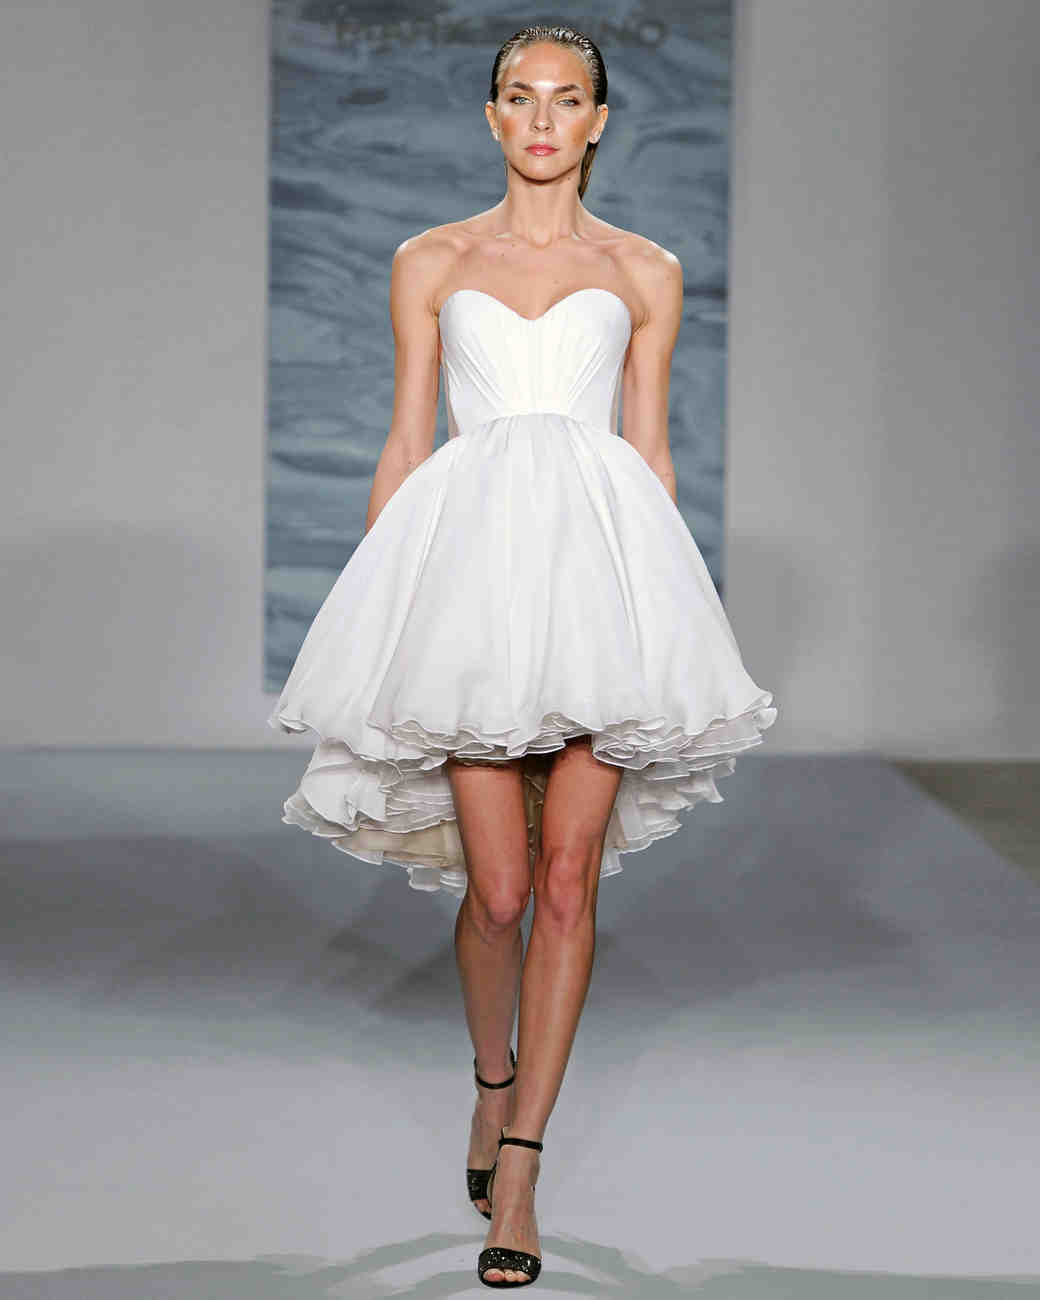 19 Short and Sweet Wedding Dresses From the Bridal Shows | Martha ...